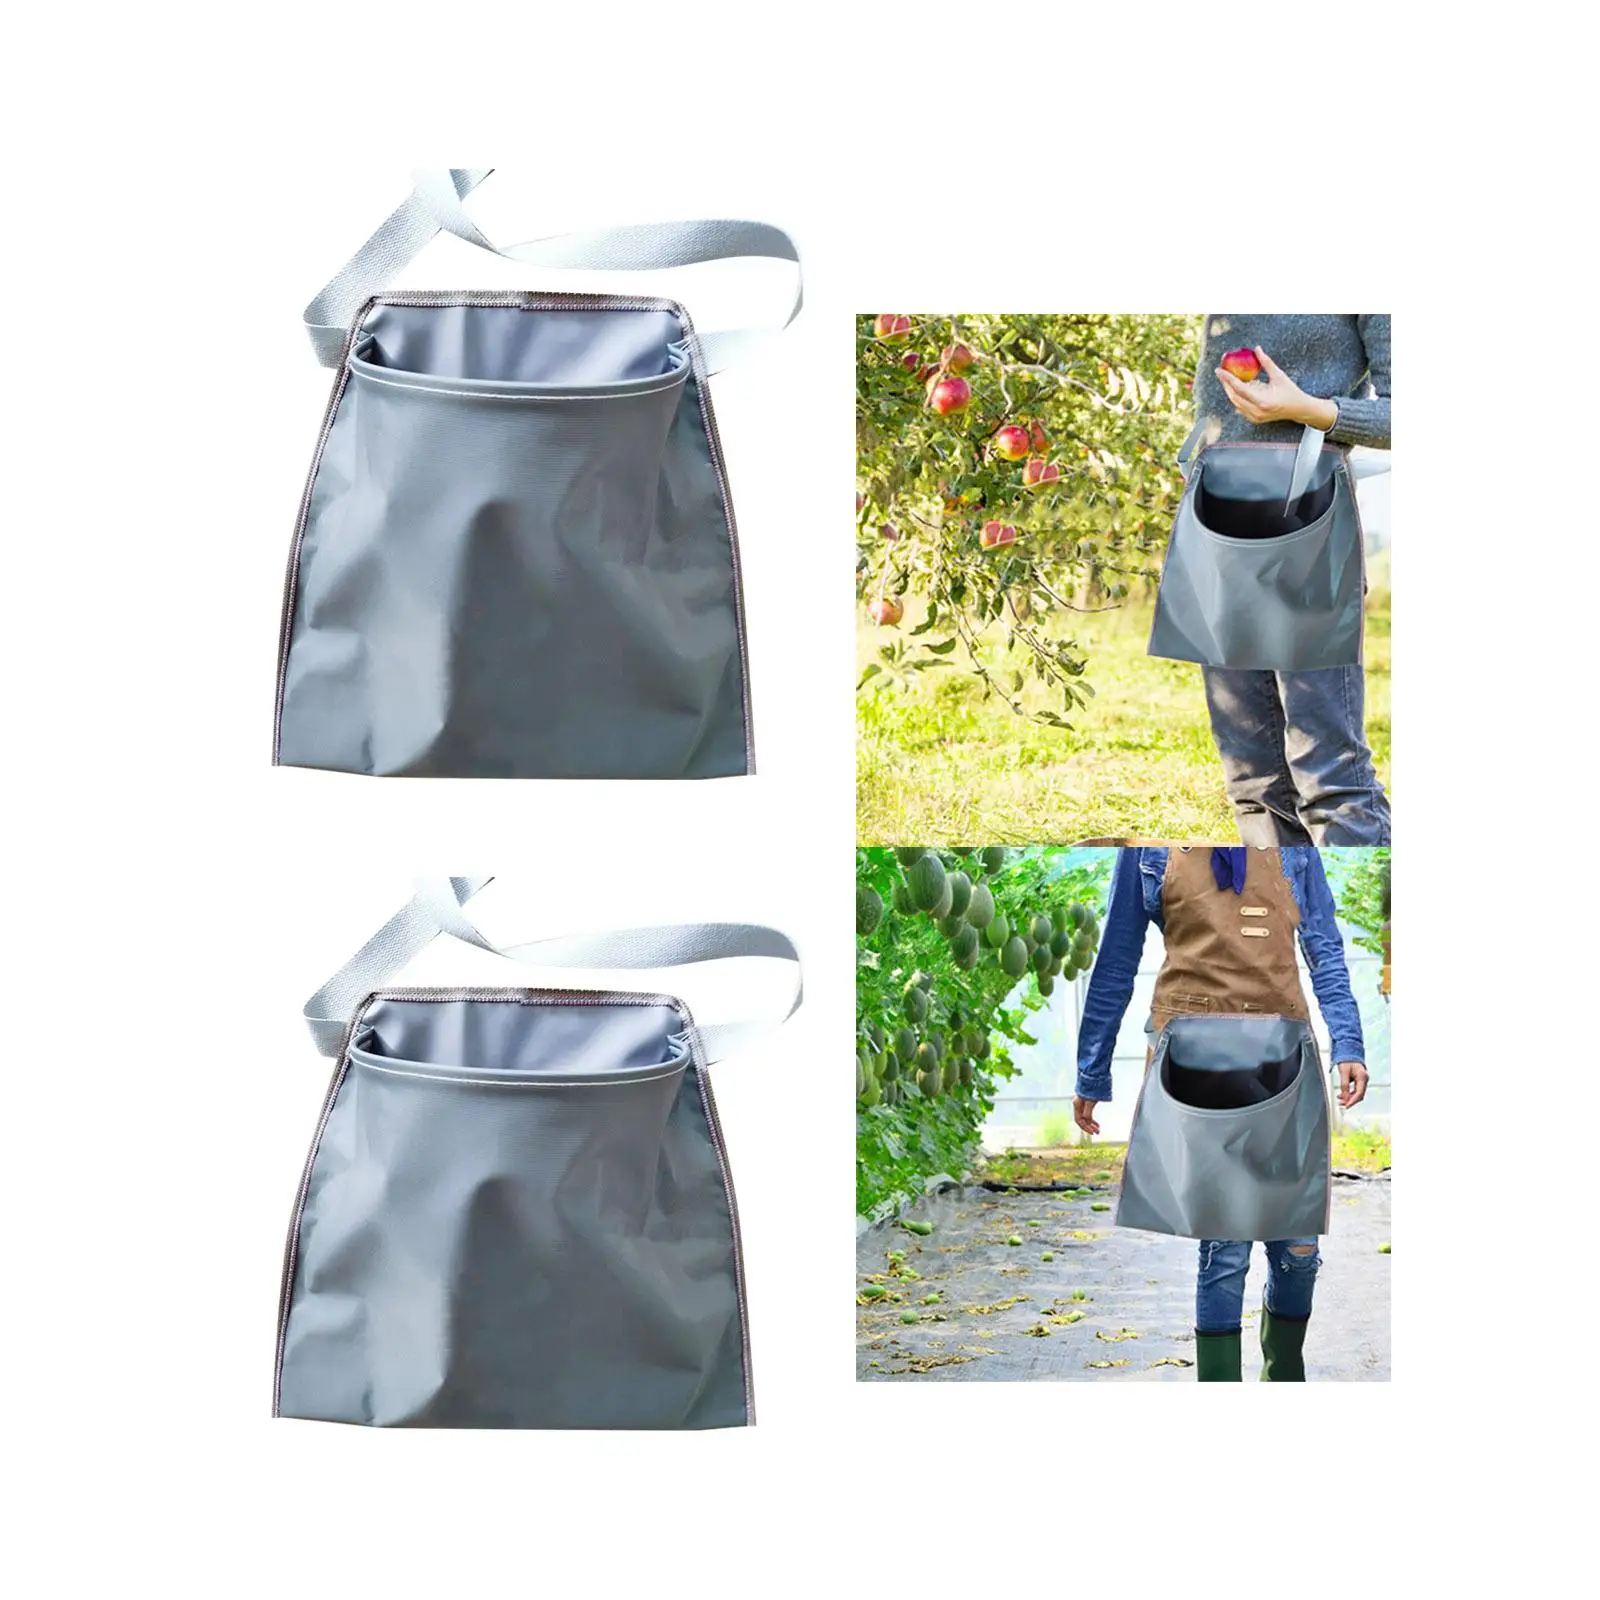 Harvest Picking Bag Reusable Grocery Bag Heavy Duty Fruit Storage Apron Pouch for Garden Orchard Farm Vegetable Hunting